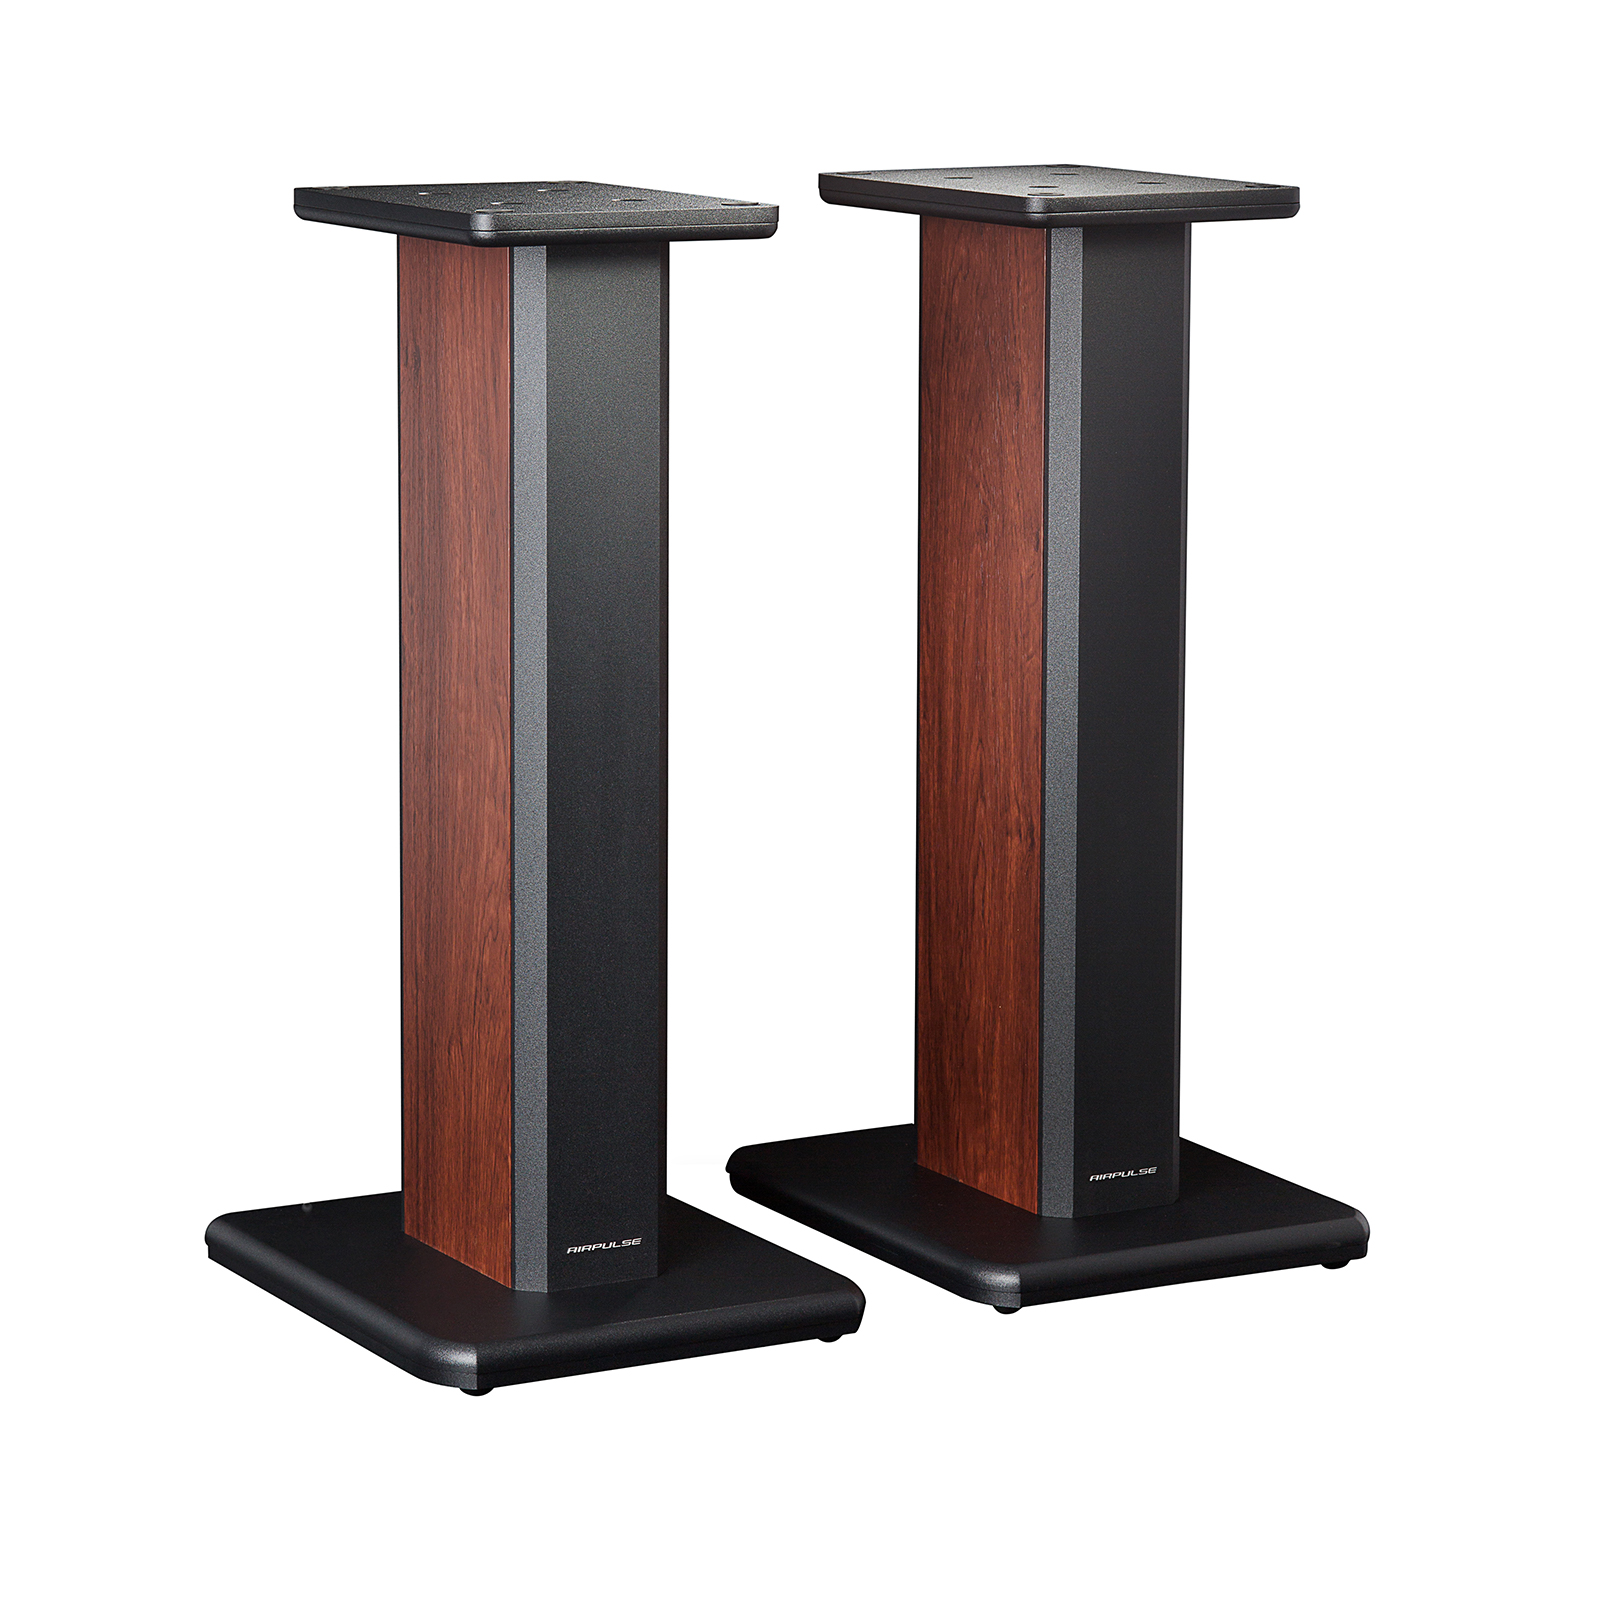 AirPulse Speaker Stands ST300 for A300 Hollowed Stands for Optional Sand Filling Tuning - Pair